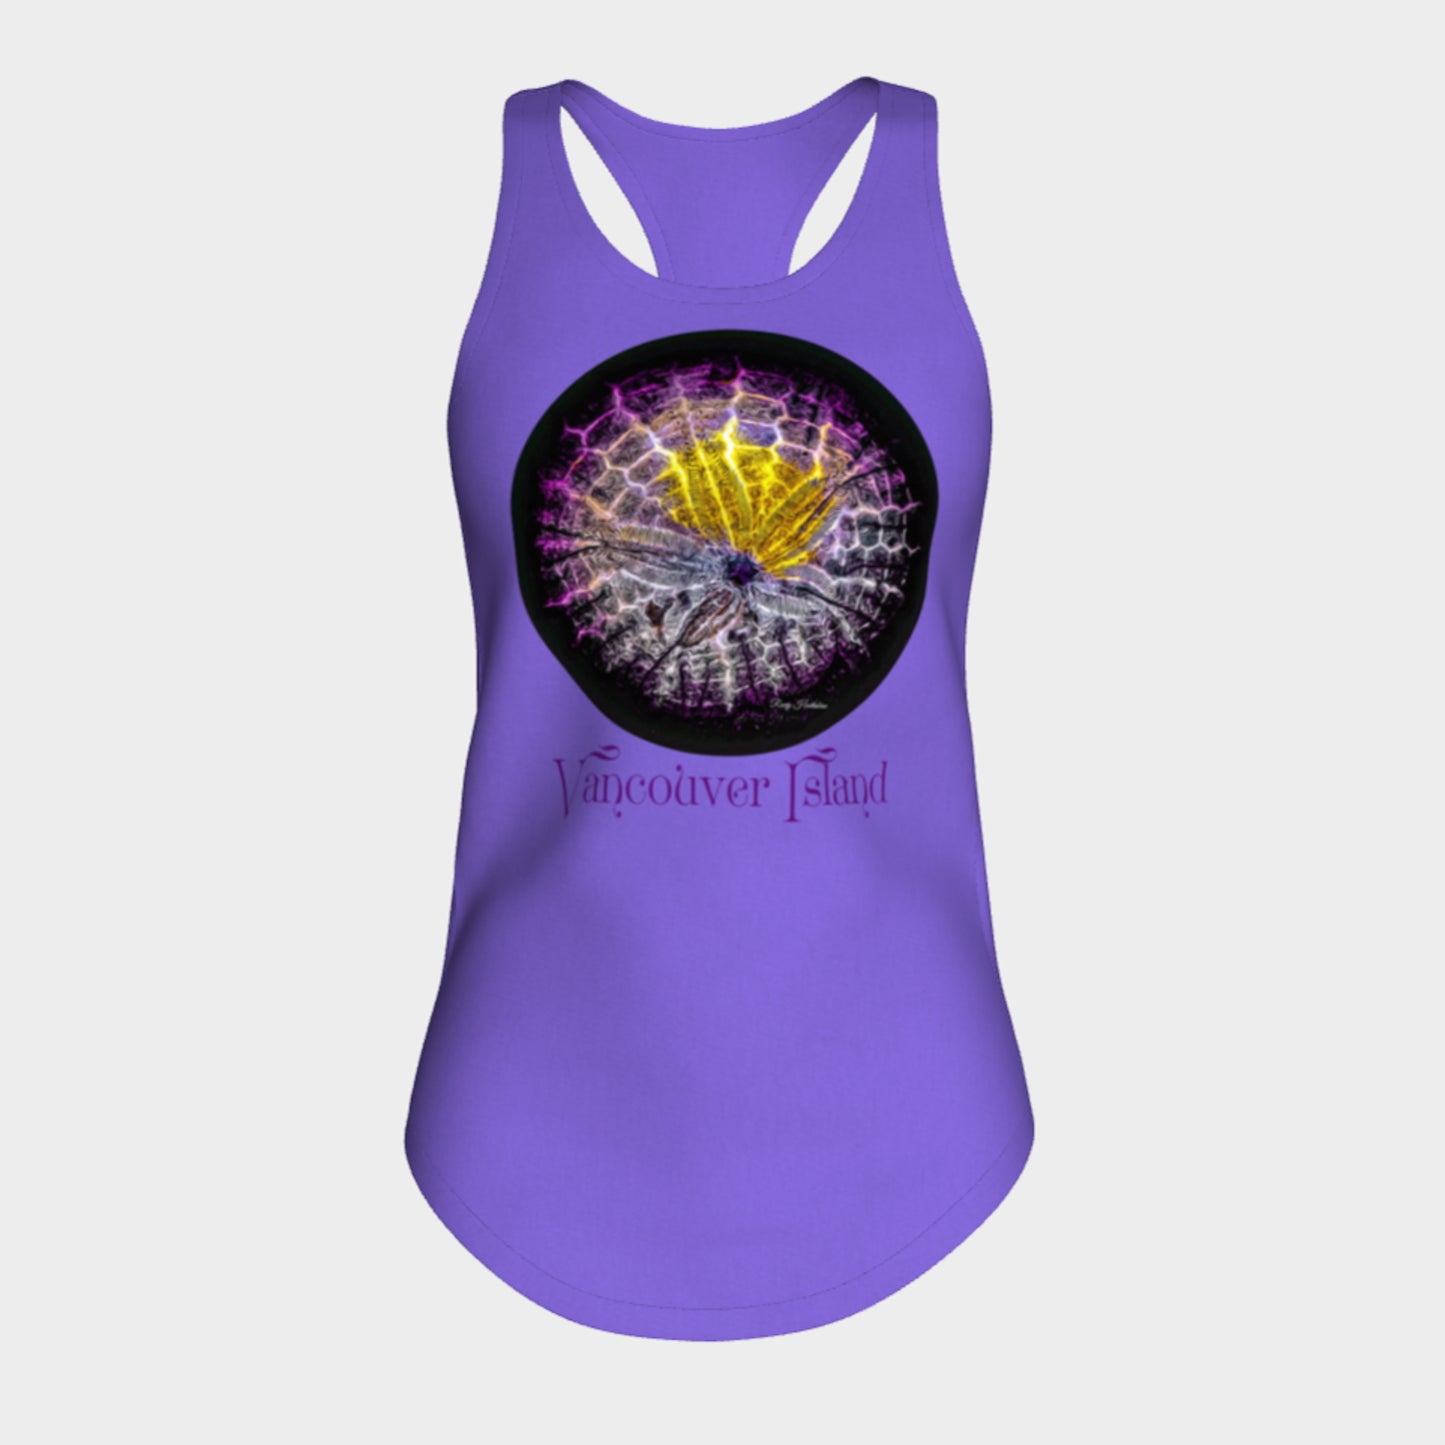 Spotlight Sand Dollar Vancouver Island Racerback Tank Top  Excellent choice for the summer or for working out.   Made from 60% spun cotton and 40% poly for a mix of comfort and performance, you get it all (including my photography and digital art) with this custom printed racerback tank top.   Van Isle Goddess Next Level racerback tank top will quickly become you go-to tank top because of the super comfy fit!